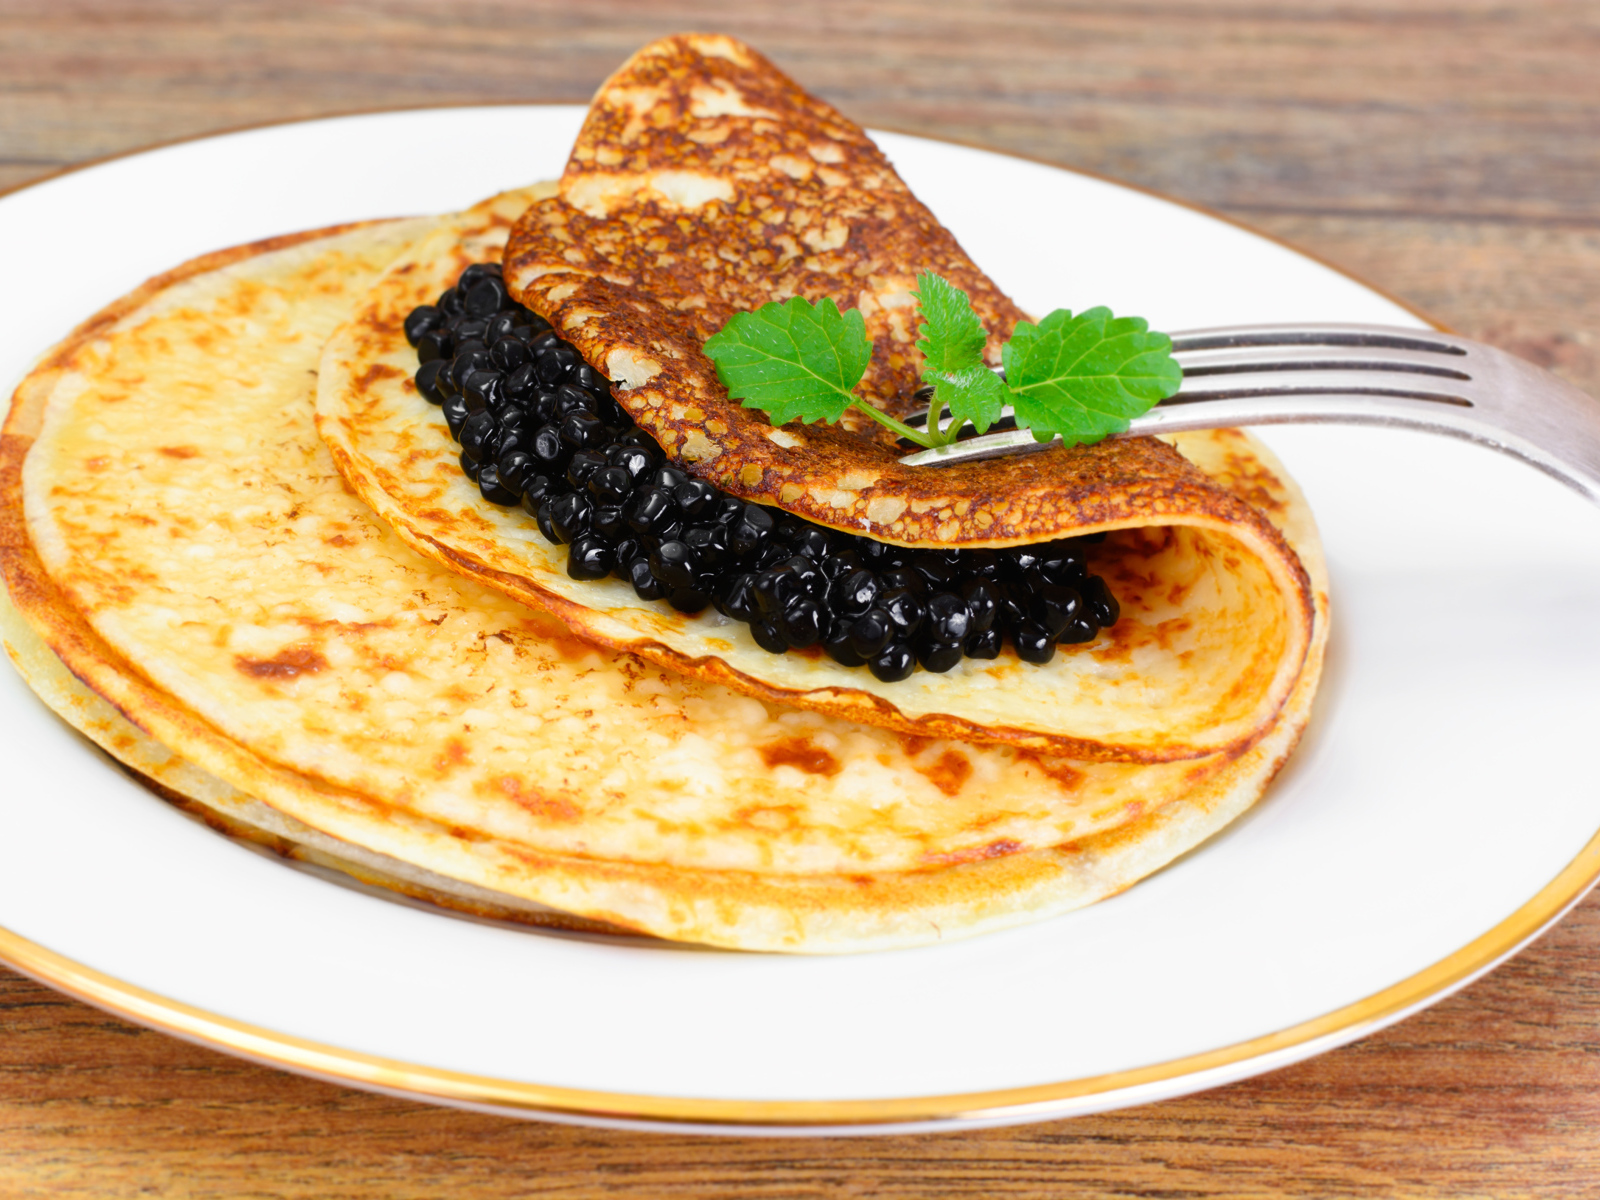 Pancakes with black caviar on a plate with a fork